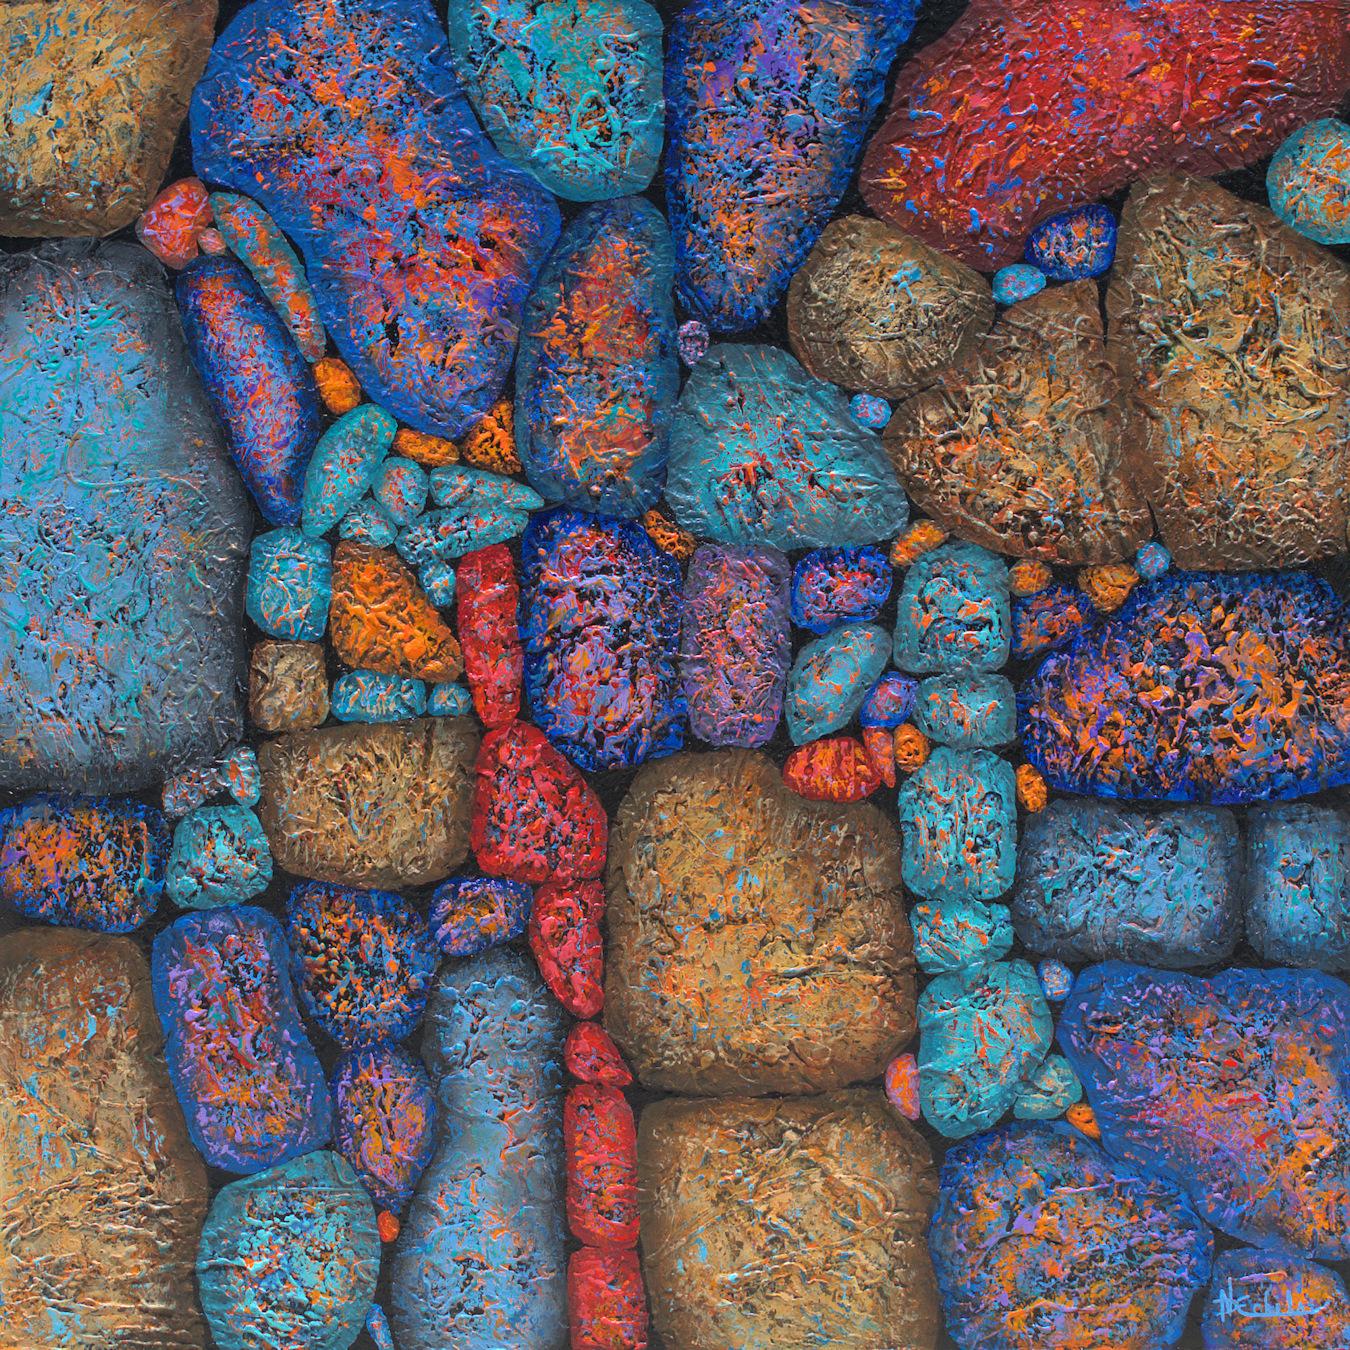 Nancy Eckels Abstract Painting - "Fancy Rocks Blue" abstract with textural purples, blues, red and aqua